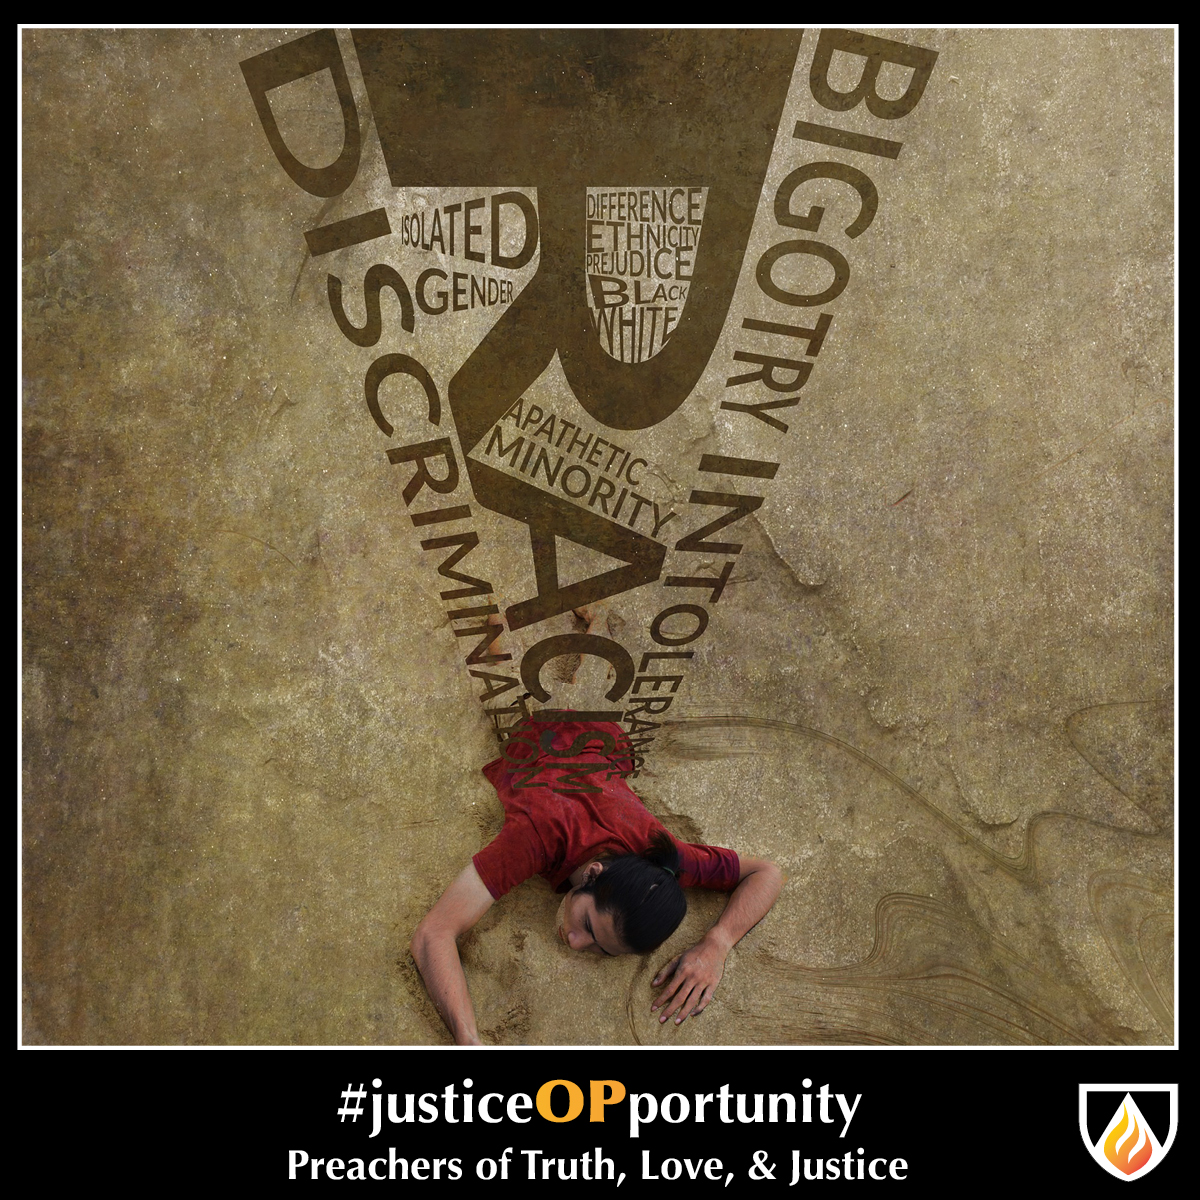 #justiceOPportunity Thursday—March 25